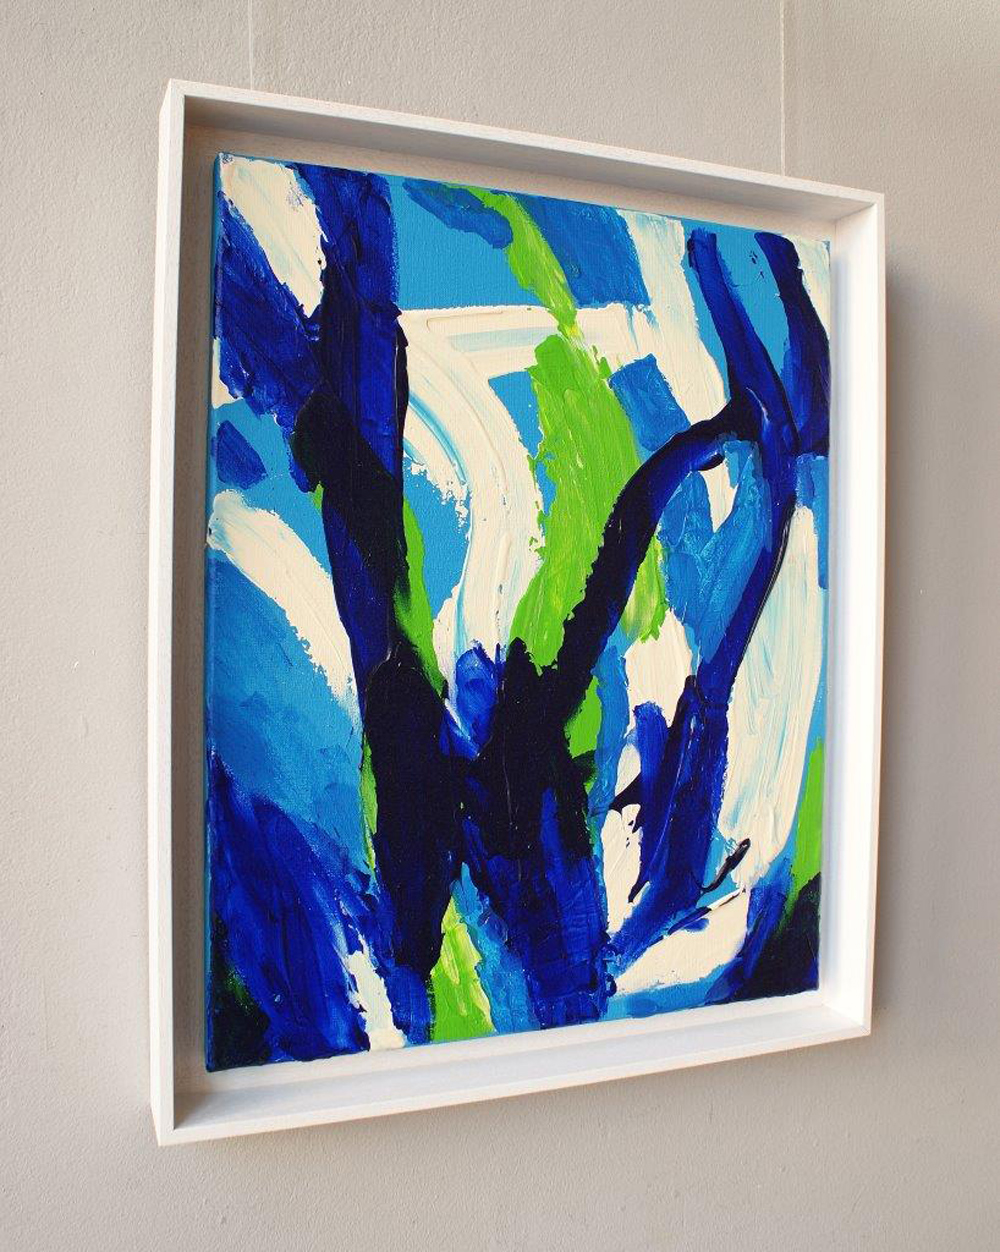 Edward Dwurnik - Abstrackt painting (Oil on Canvas | Size: 46 x 56 cm | Price: 5000 PLN)